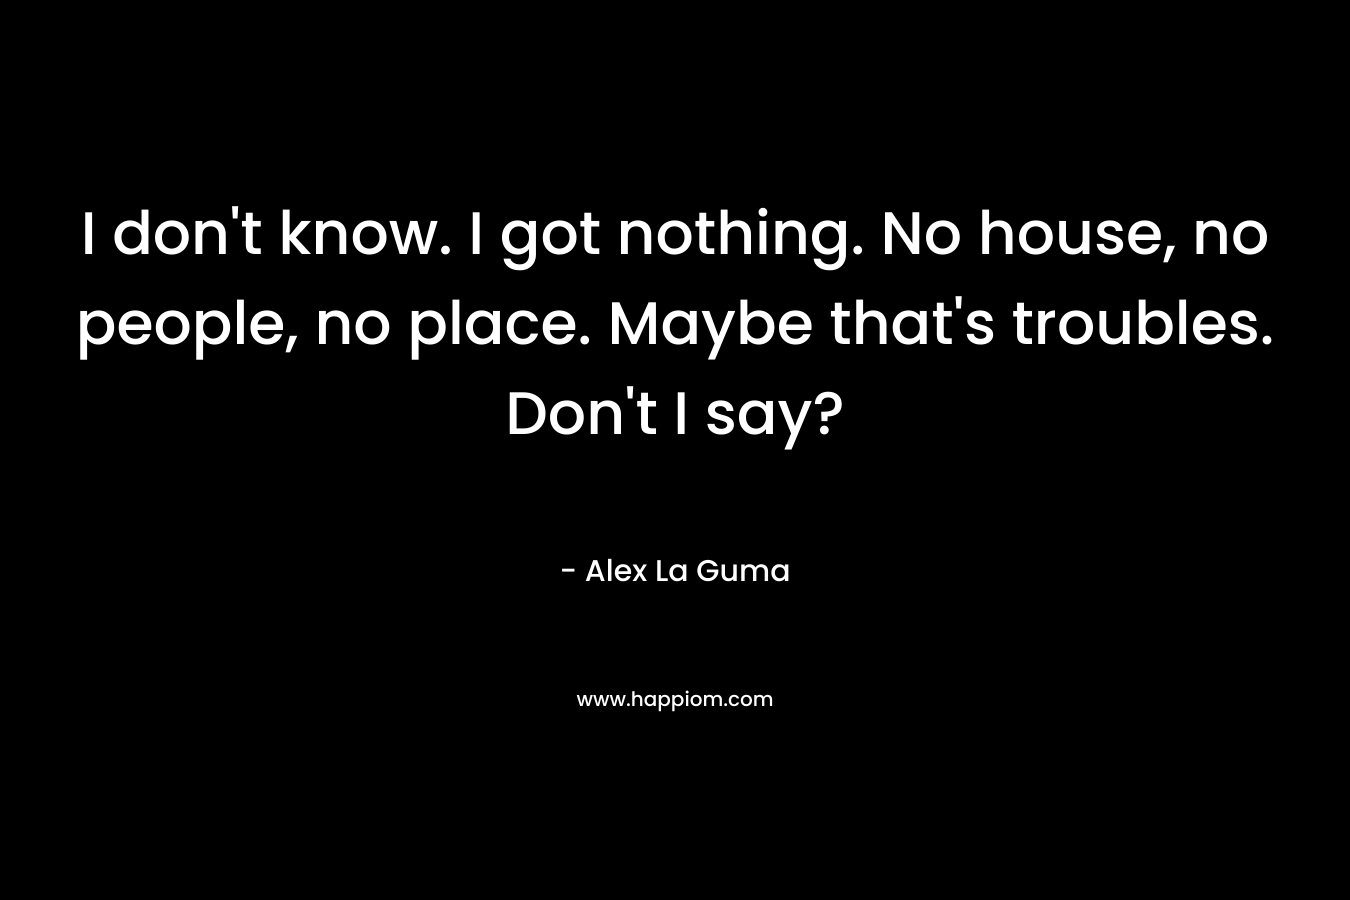 I don't know. I got nothing. No house, no people, no place. Maybe that's troubles. Don't I say?